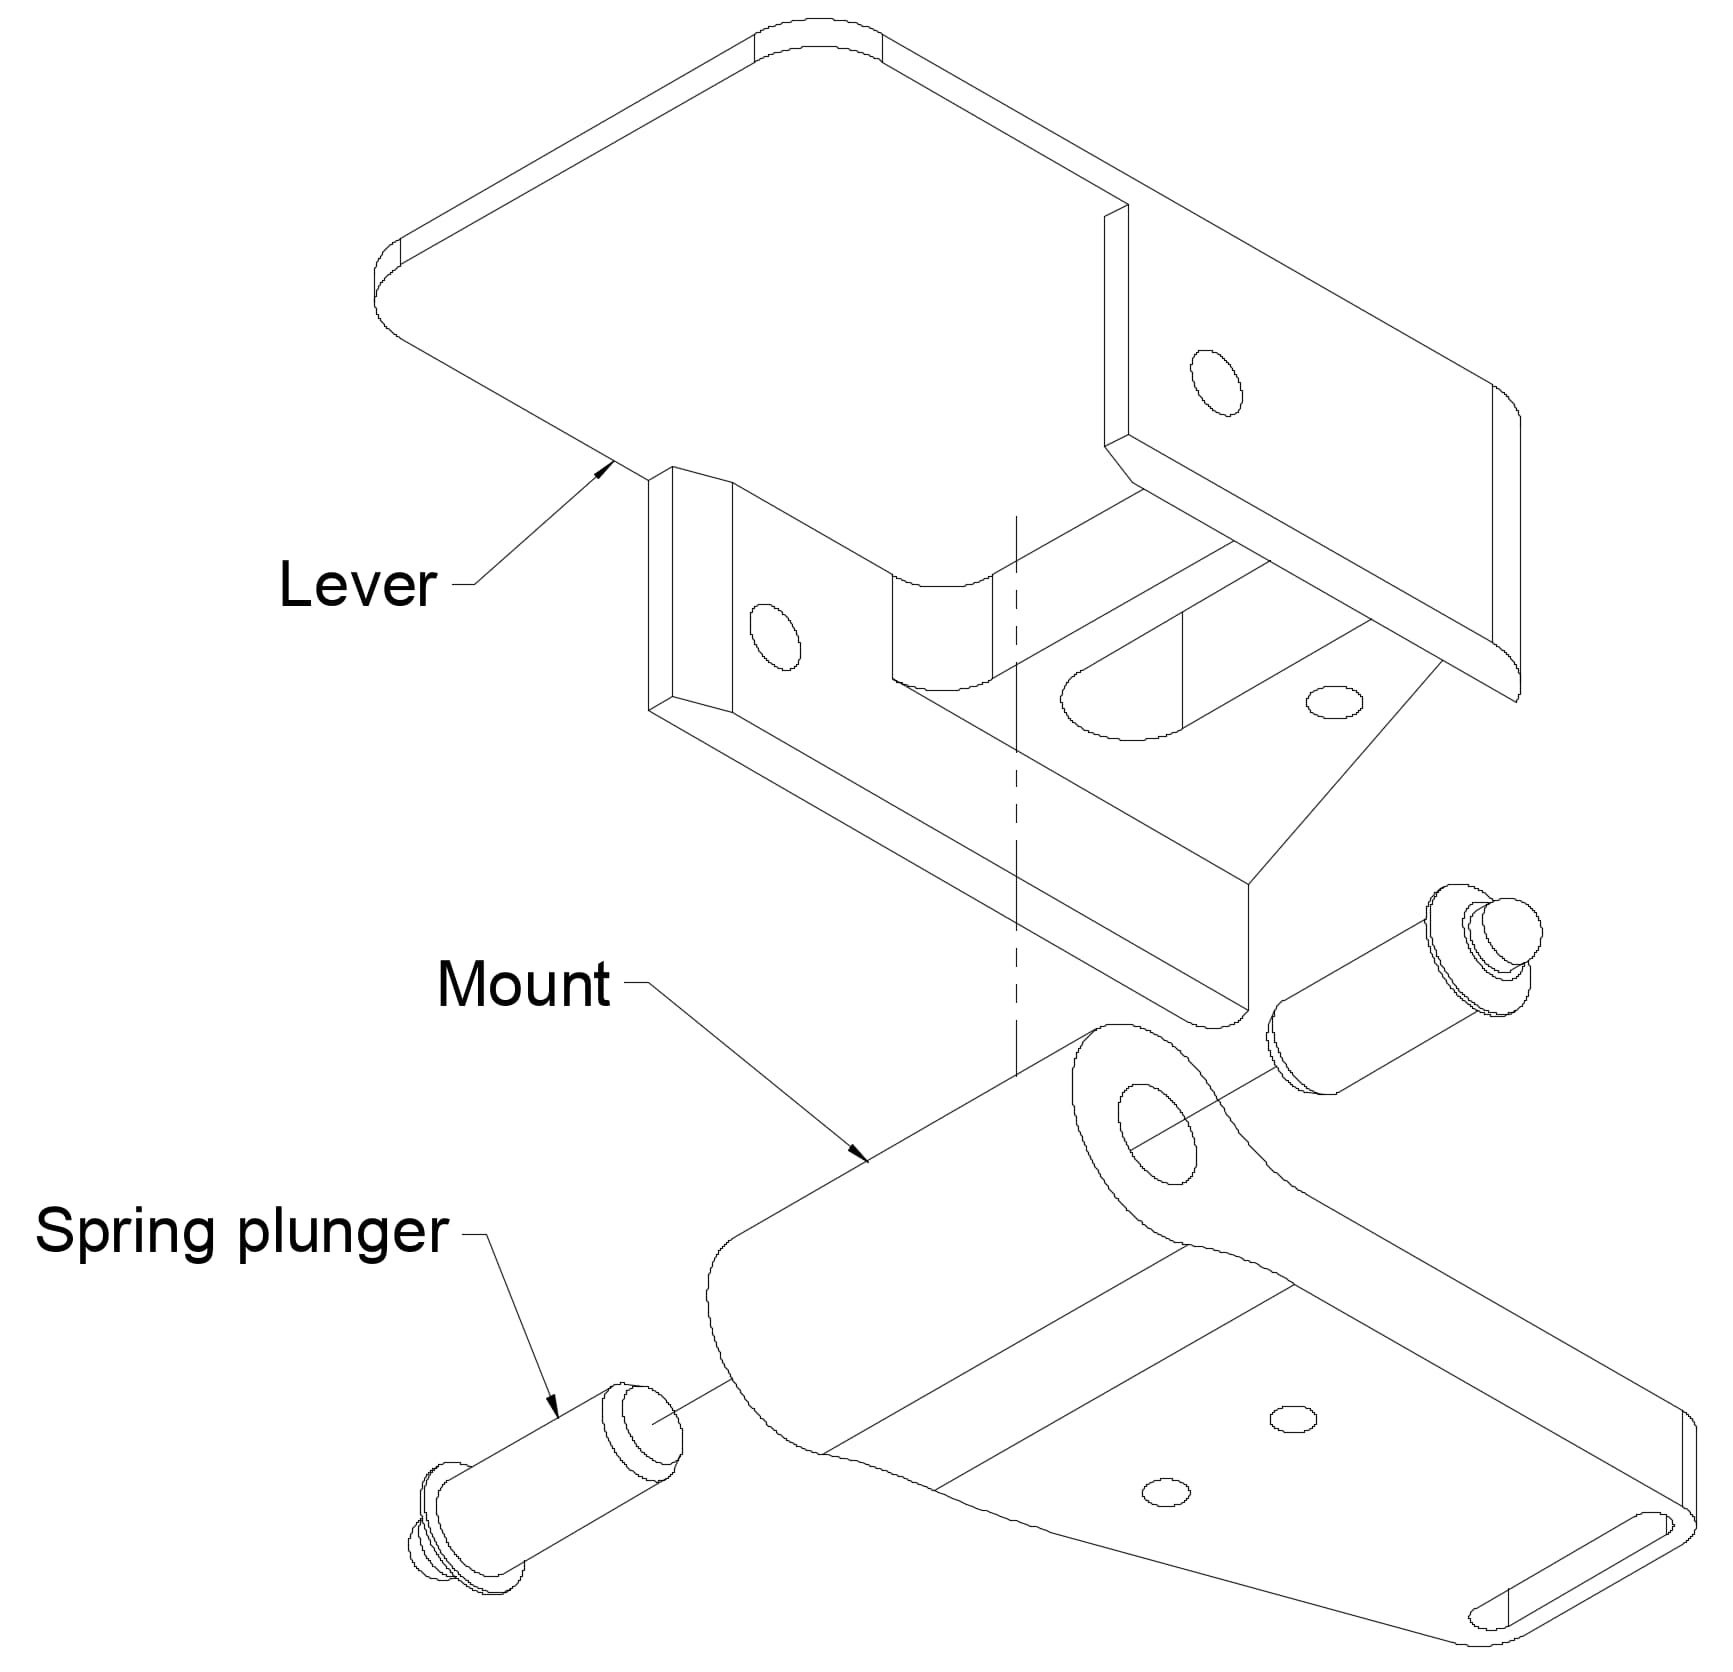 Lever secures to the mount with spring plungers